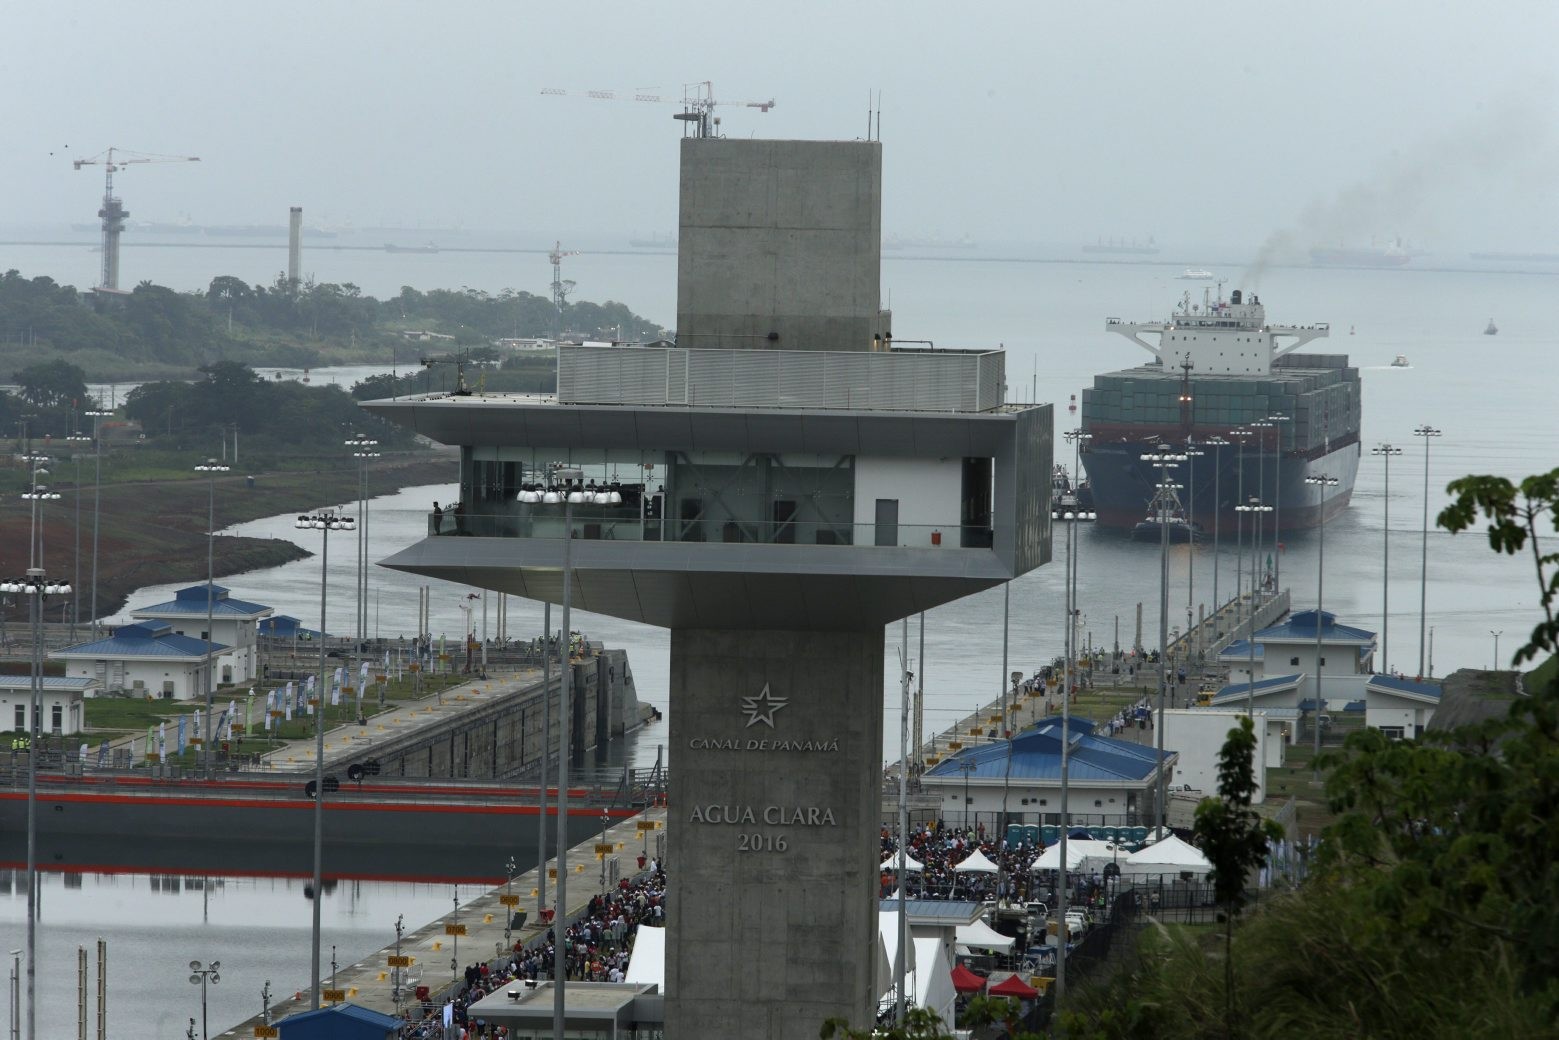 The Neopanamax cargo ship, Cosco Shipping Panama, approaches the new Agua Clara locks, part of the Panama Canal expansion project, near the port city of Colon, Panama, Sunday June 26, 2016. The ship carrying more than 9,000 containers entered the newly expanded locks that will double the Panama Canal's capacity in a multibillion-dollar bet on a bright economic future despite tough times for international shipping. (AP Photo/ Arnulfo Franco) Panama Canal Expansion